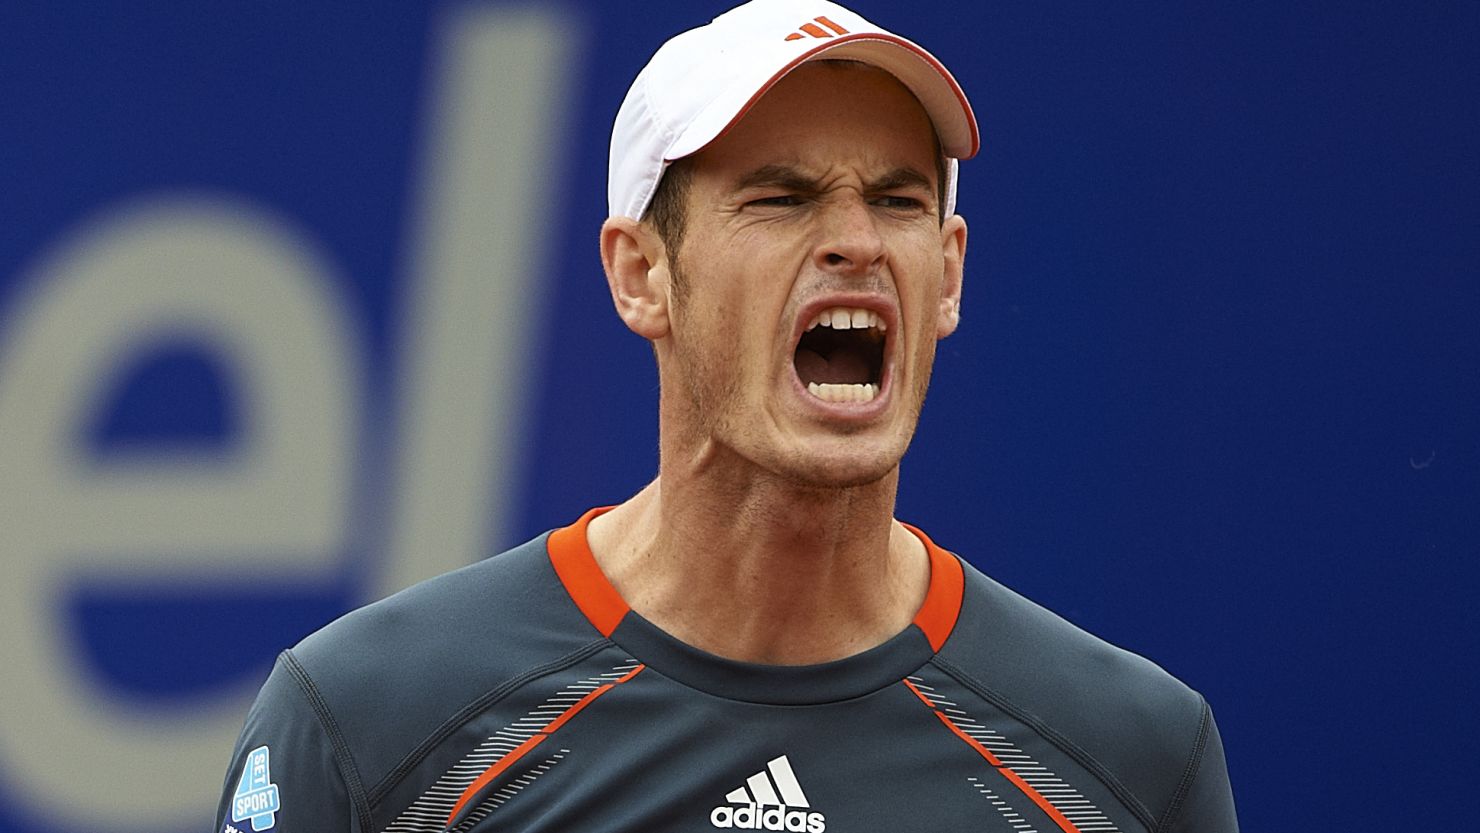 World No. 4 Andy Murray was dumped out of the Barcelona Open by 21-year-old Canadian Milos Raonic